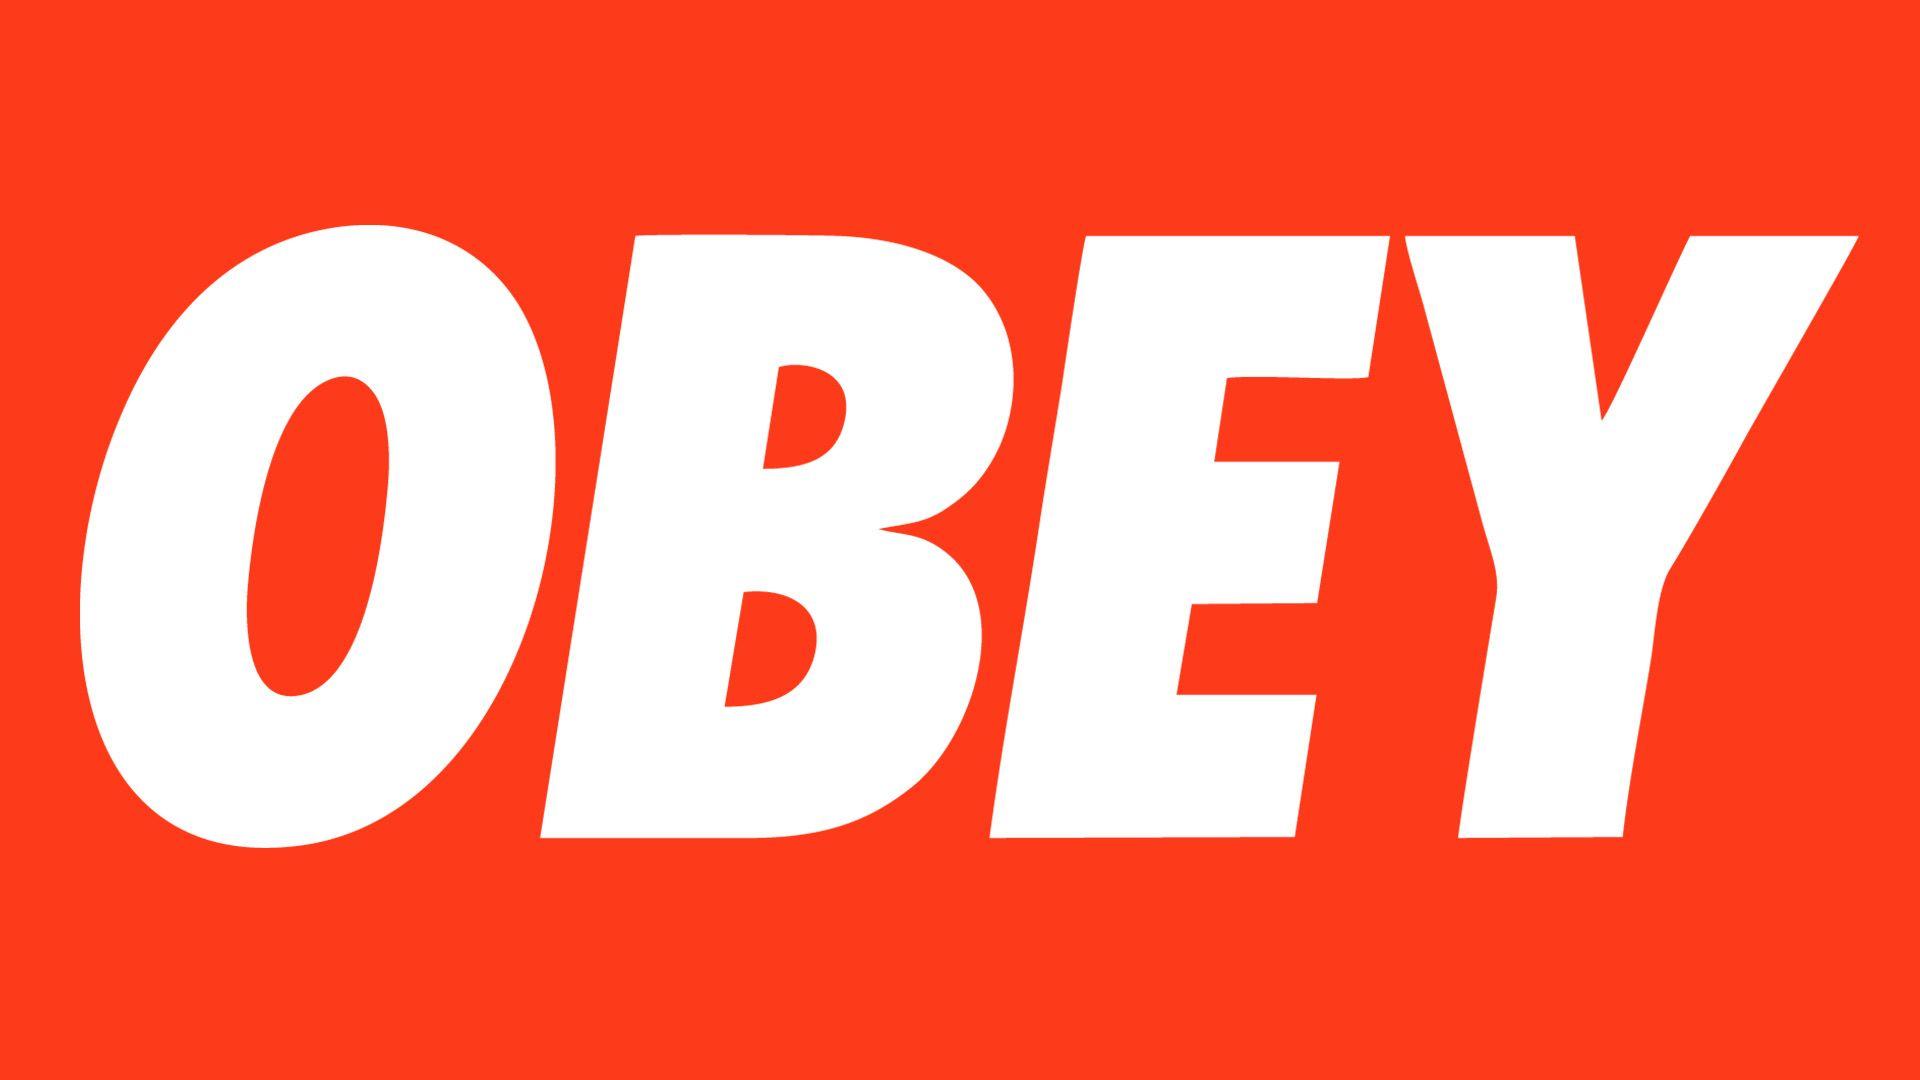 Obey Logo - Obey Logo, Obey Symbol, Meaning, History and Evolution